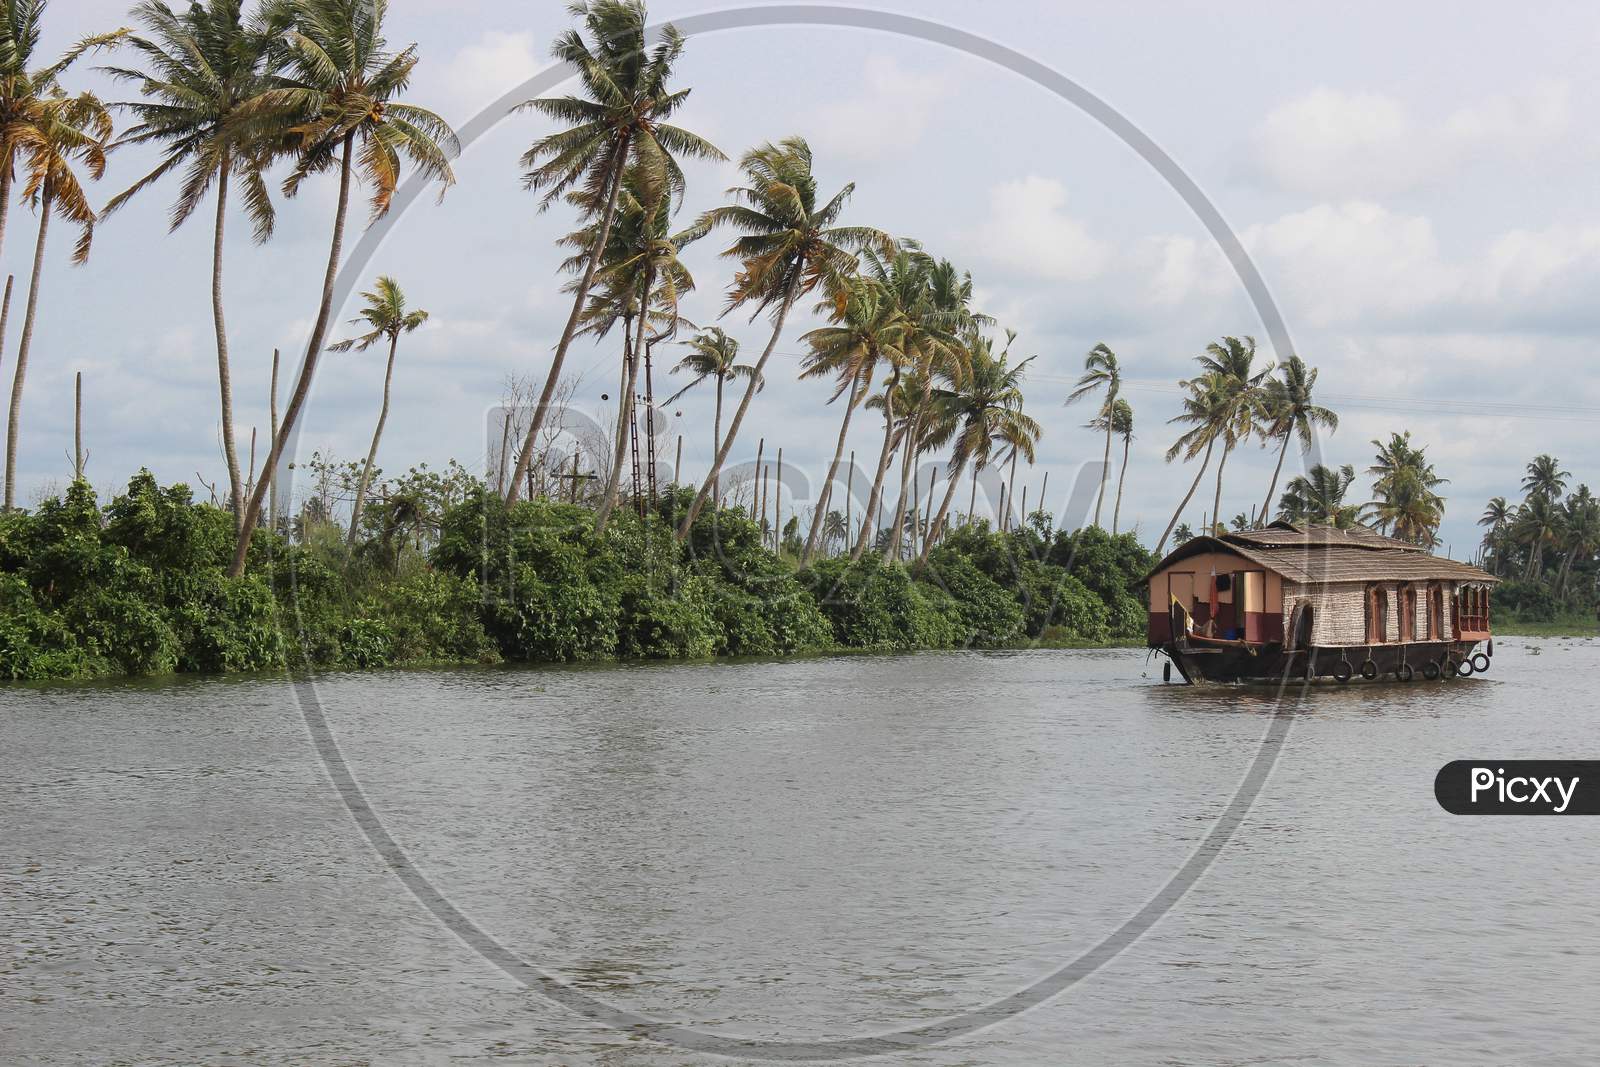 House boat in the Alleppey backwater in Kerala/India.